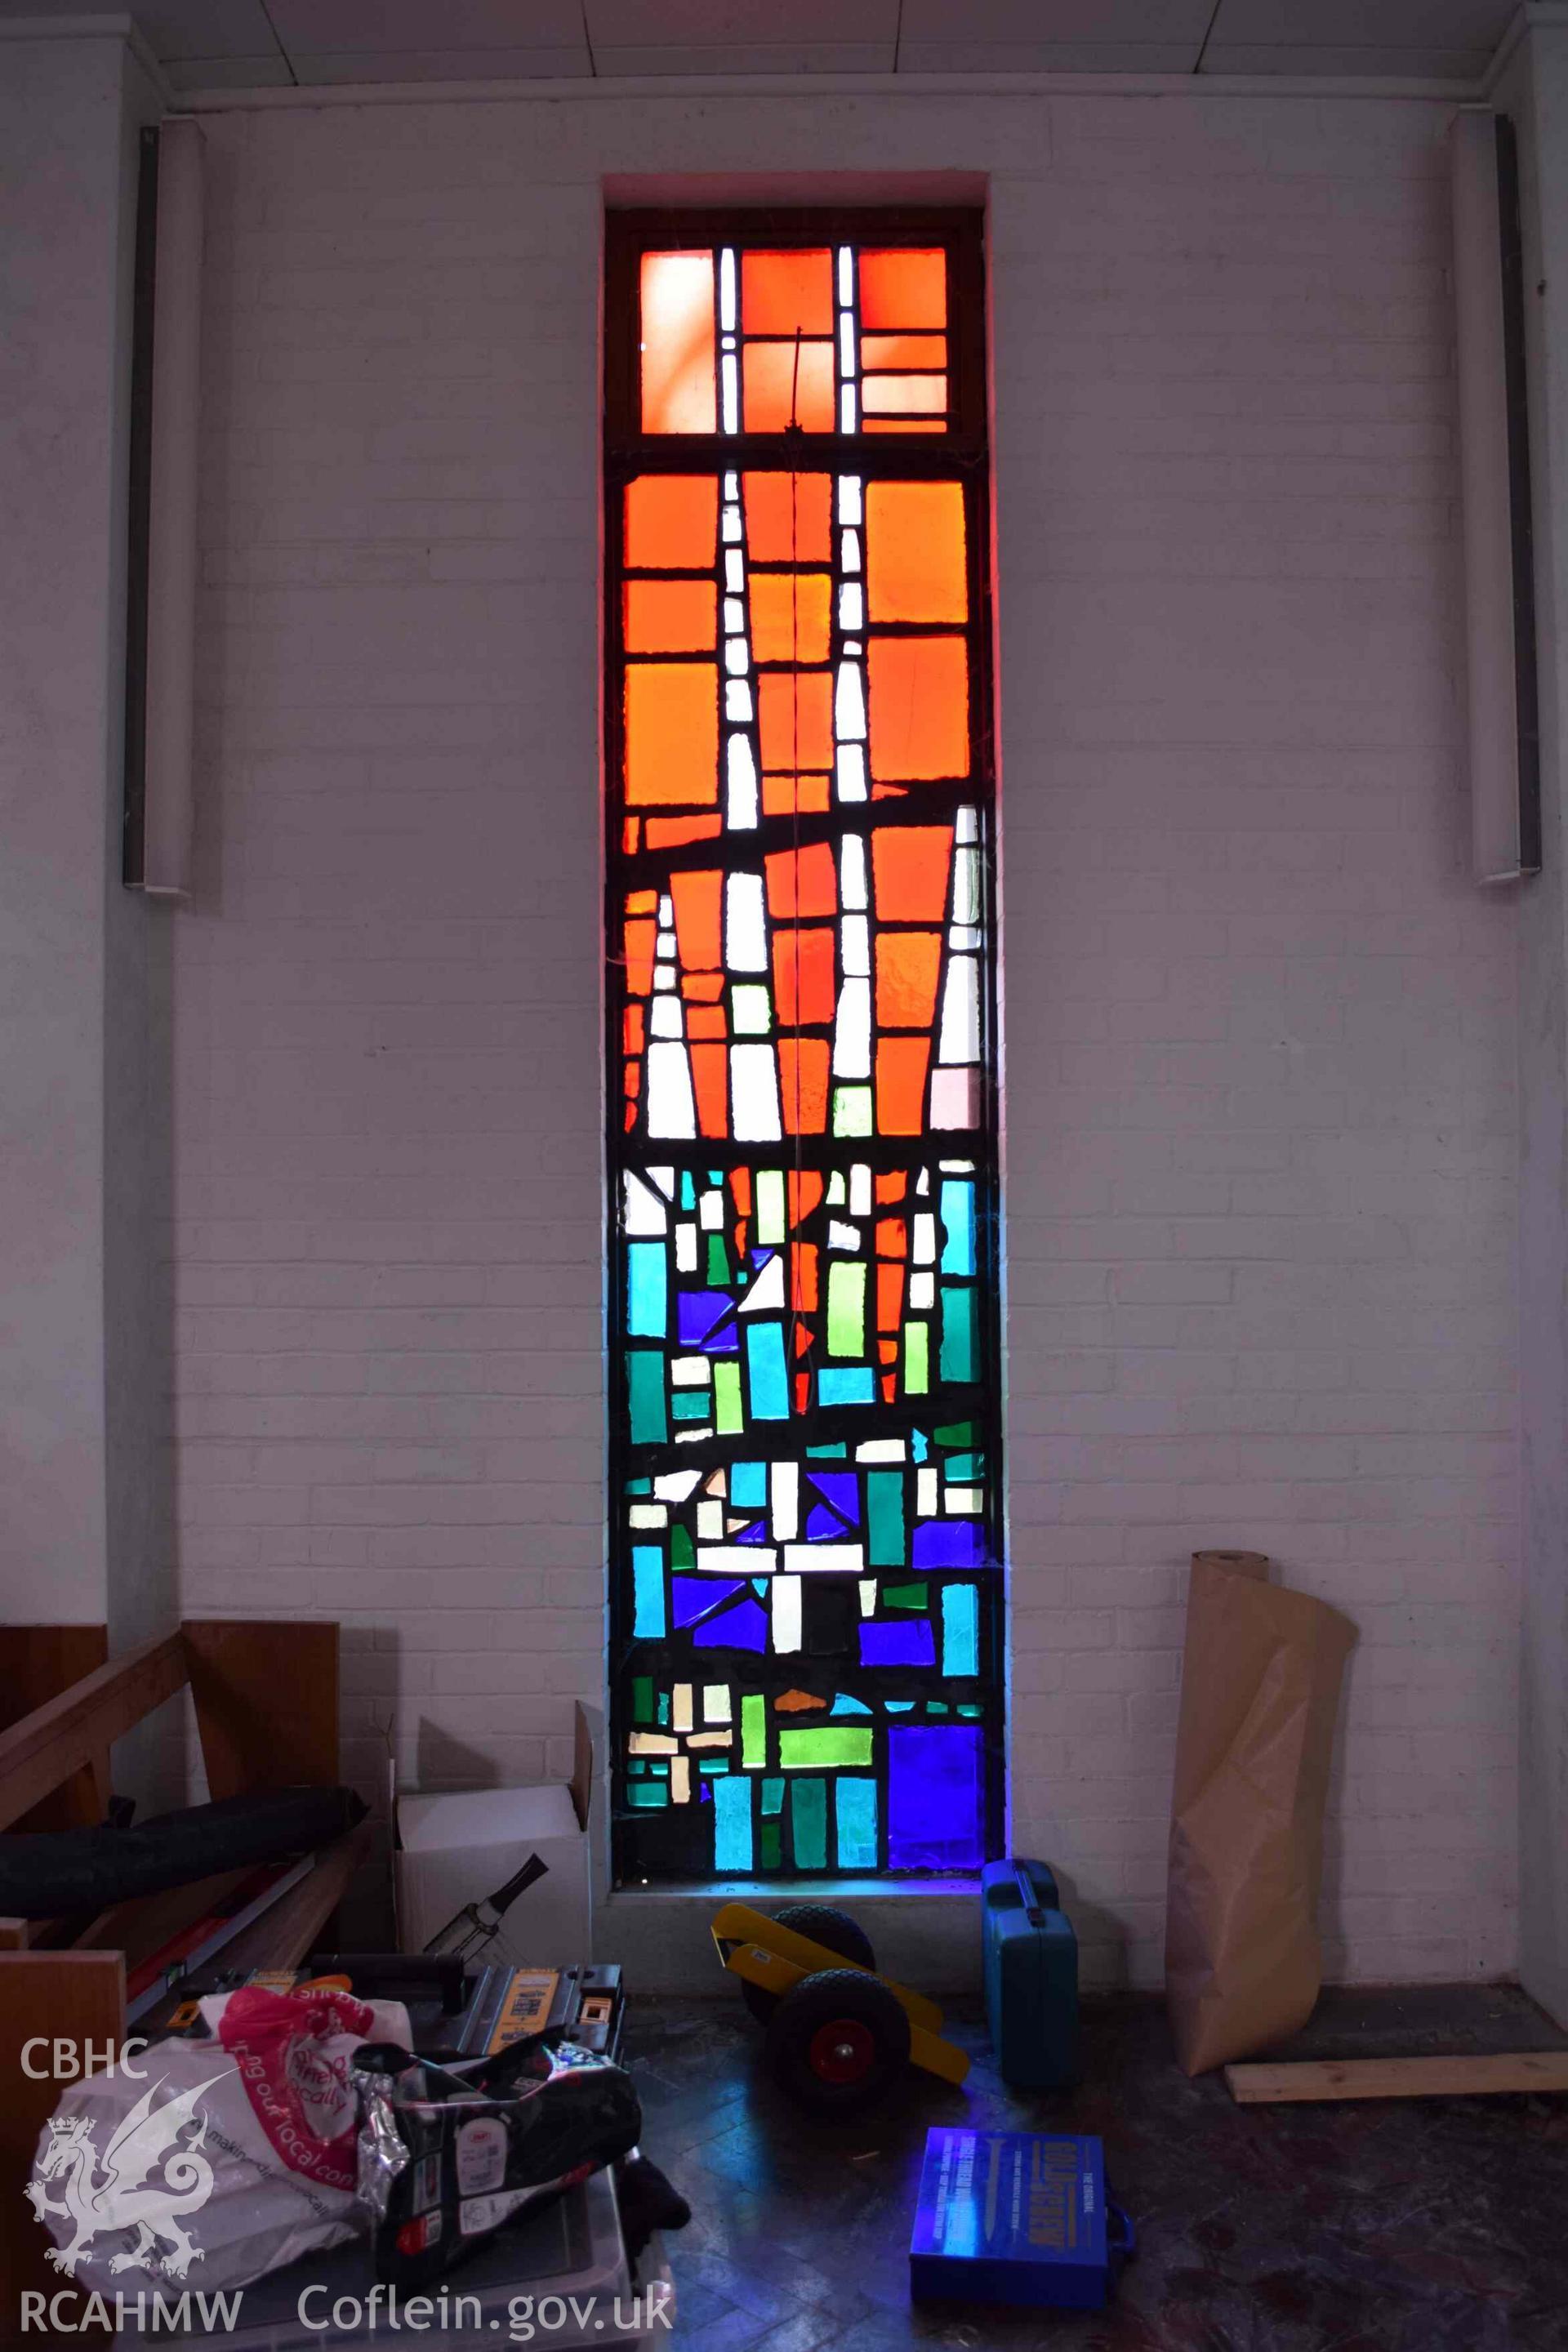 Photograph showing a Jonah Jones Dalle de Verre window (3b), at the church of The Resurrection of Our Saviour, Morfa Nefyn, taken on behalf of the Architectural Glass Centre during the removal of the windows in March 2019.